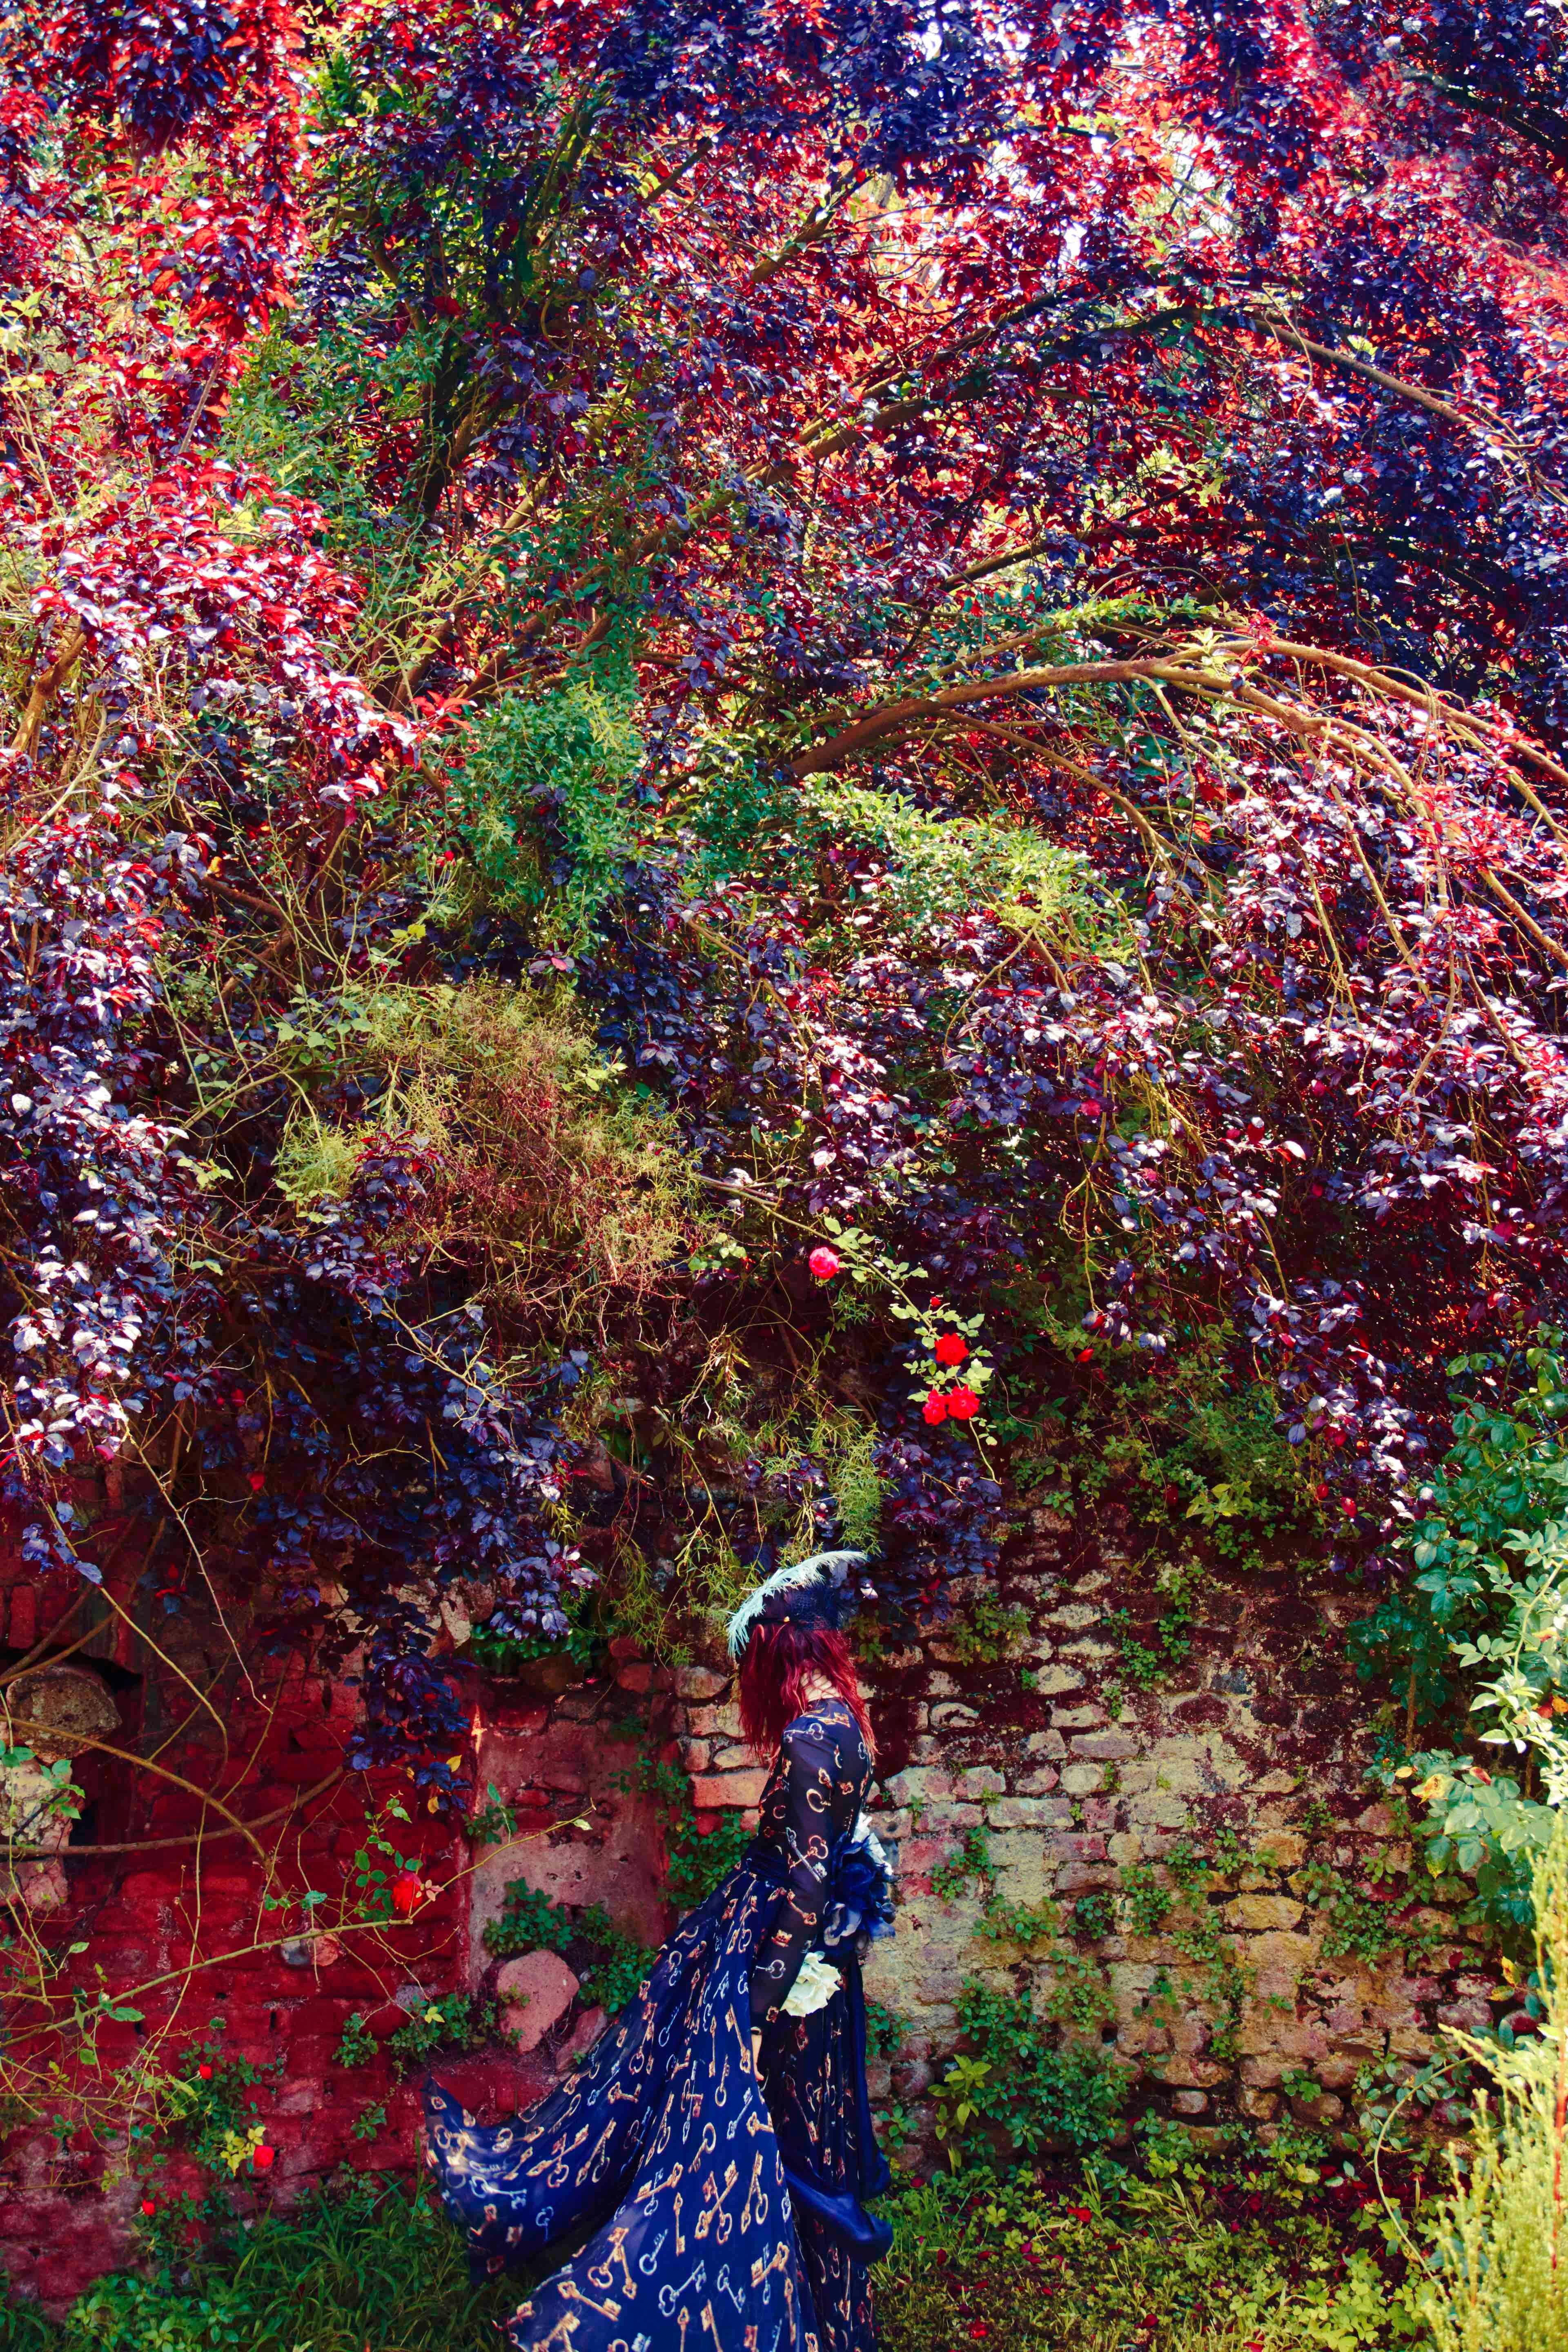 Erik MADIGAN HECK (*1983, United States)
The Gardens of Ninfa, Old Future, 2014
Chromogenic print
Sheet 152.4x 111.8 cm (60 x 44 in.)
Edition of 9, plus 2 AP; Ed. no. 2/9
Print only

Originally from Excelsior, Minnesota, Erik Madigan Heck (*1983) is